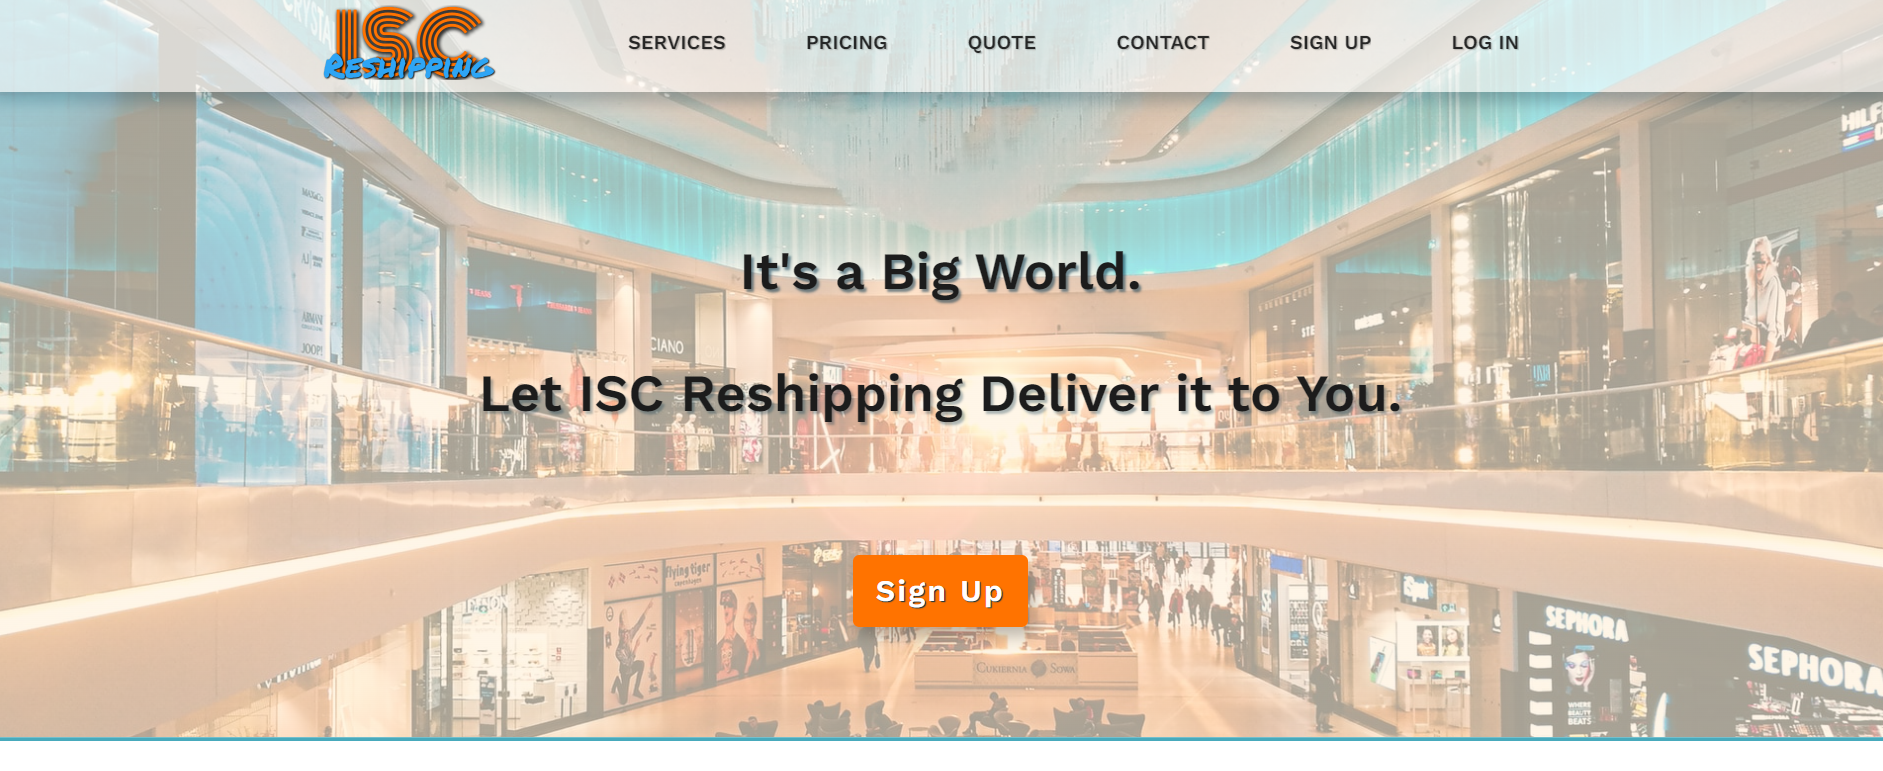 isc reshipping